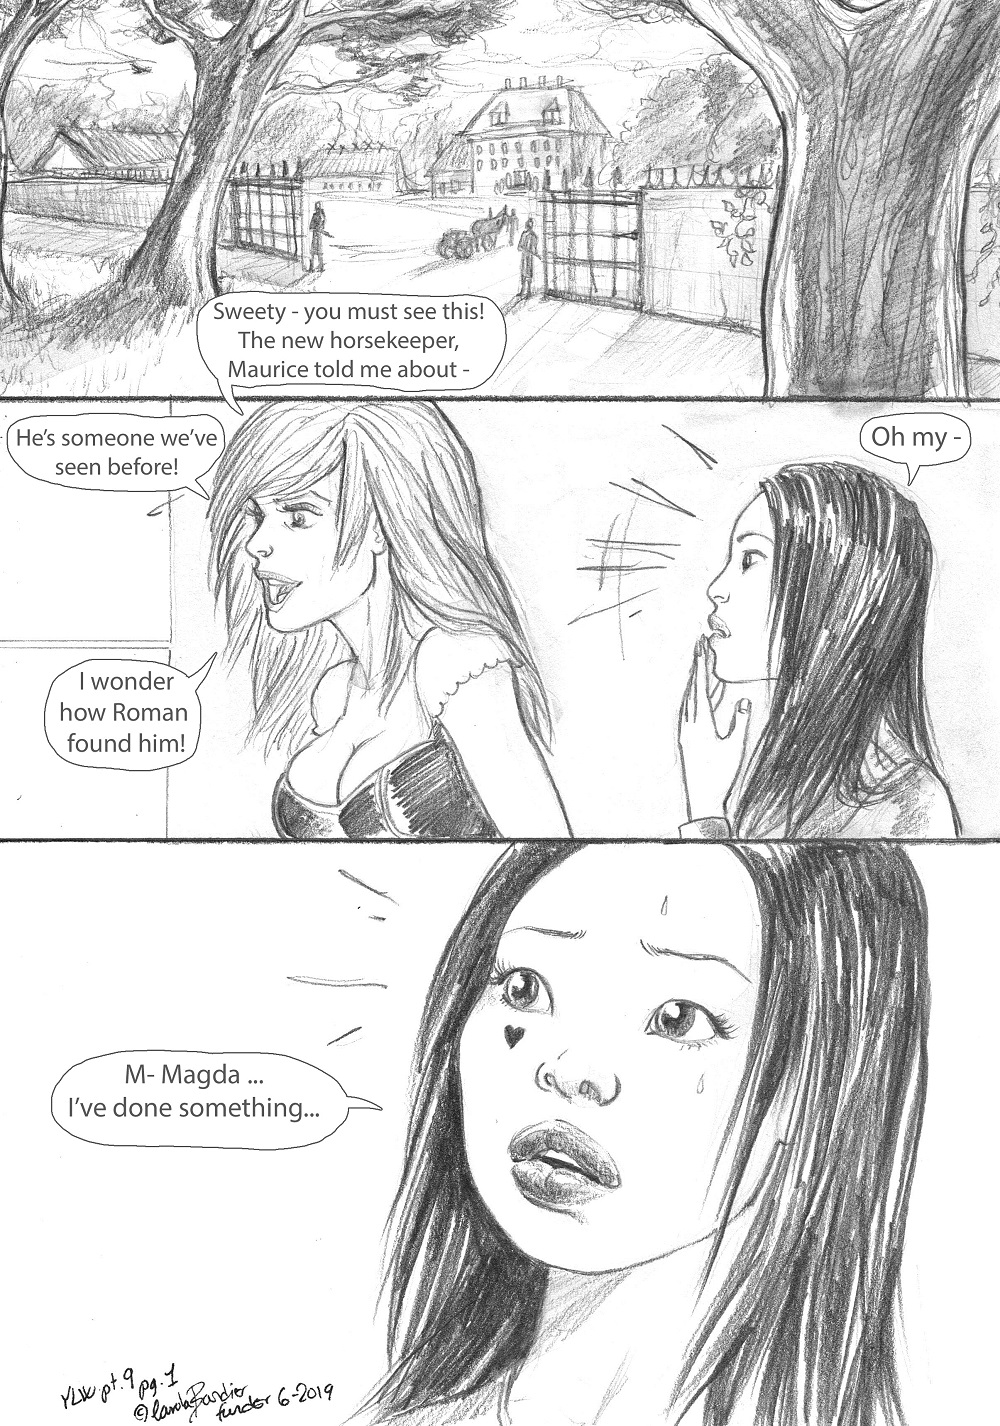 YLW_part9_A_Convenient_Coincidence_page1